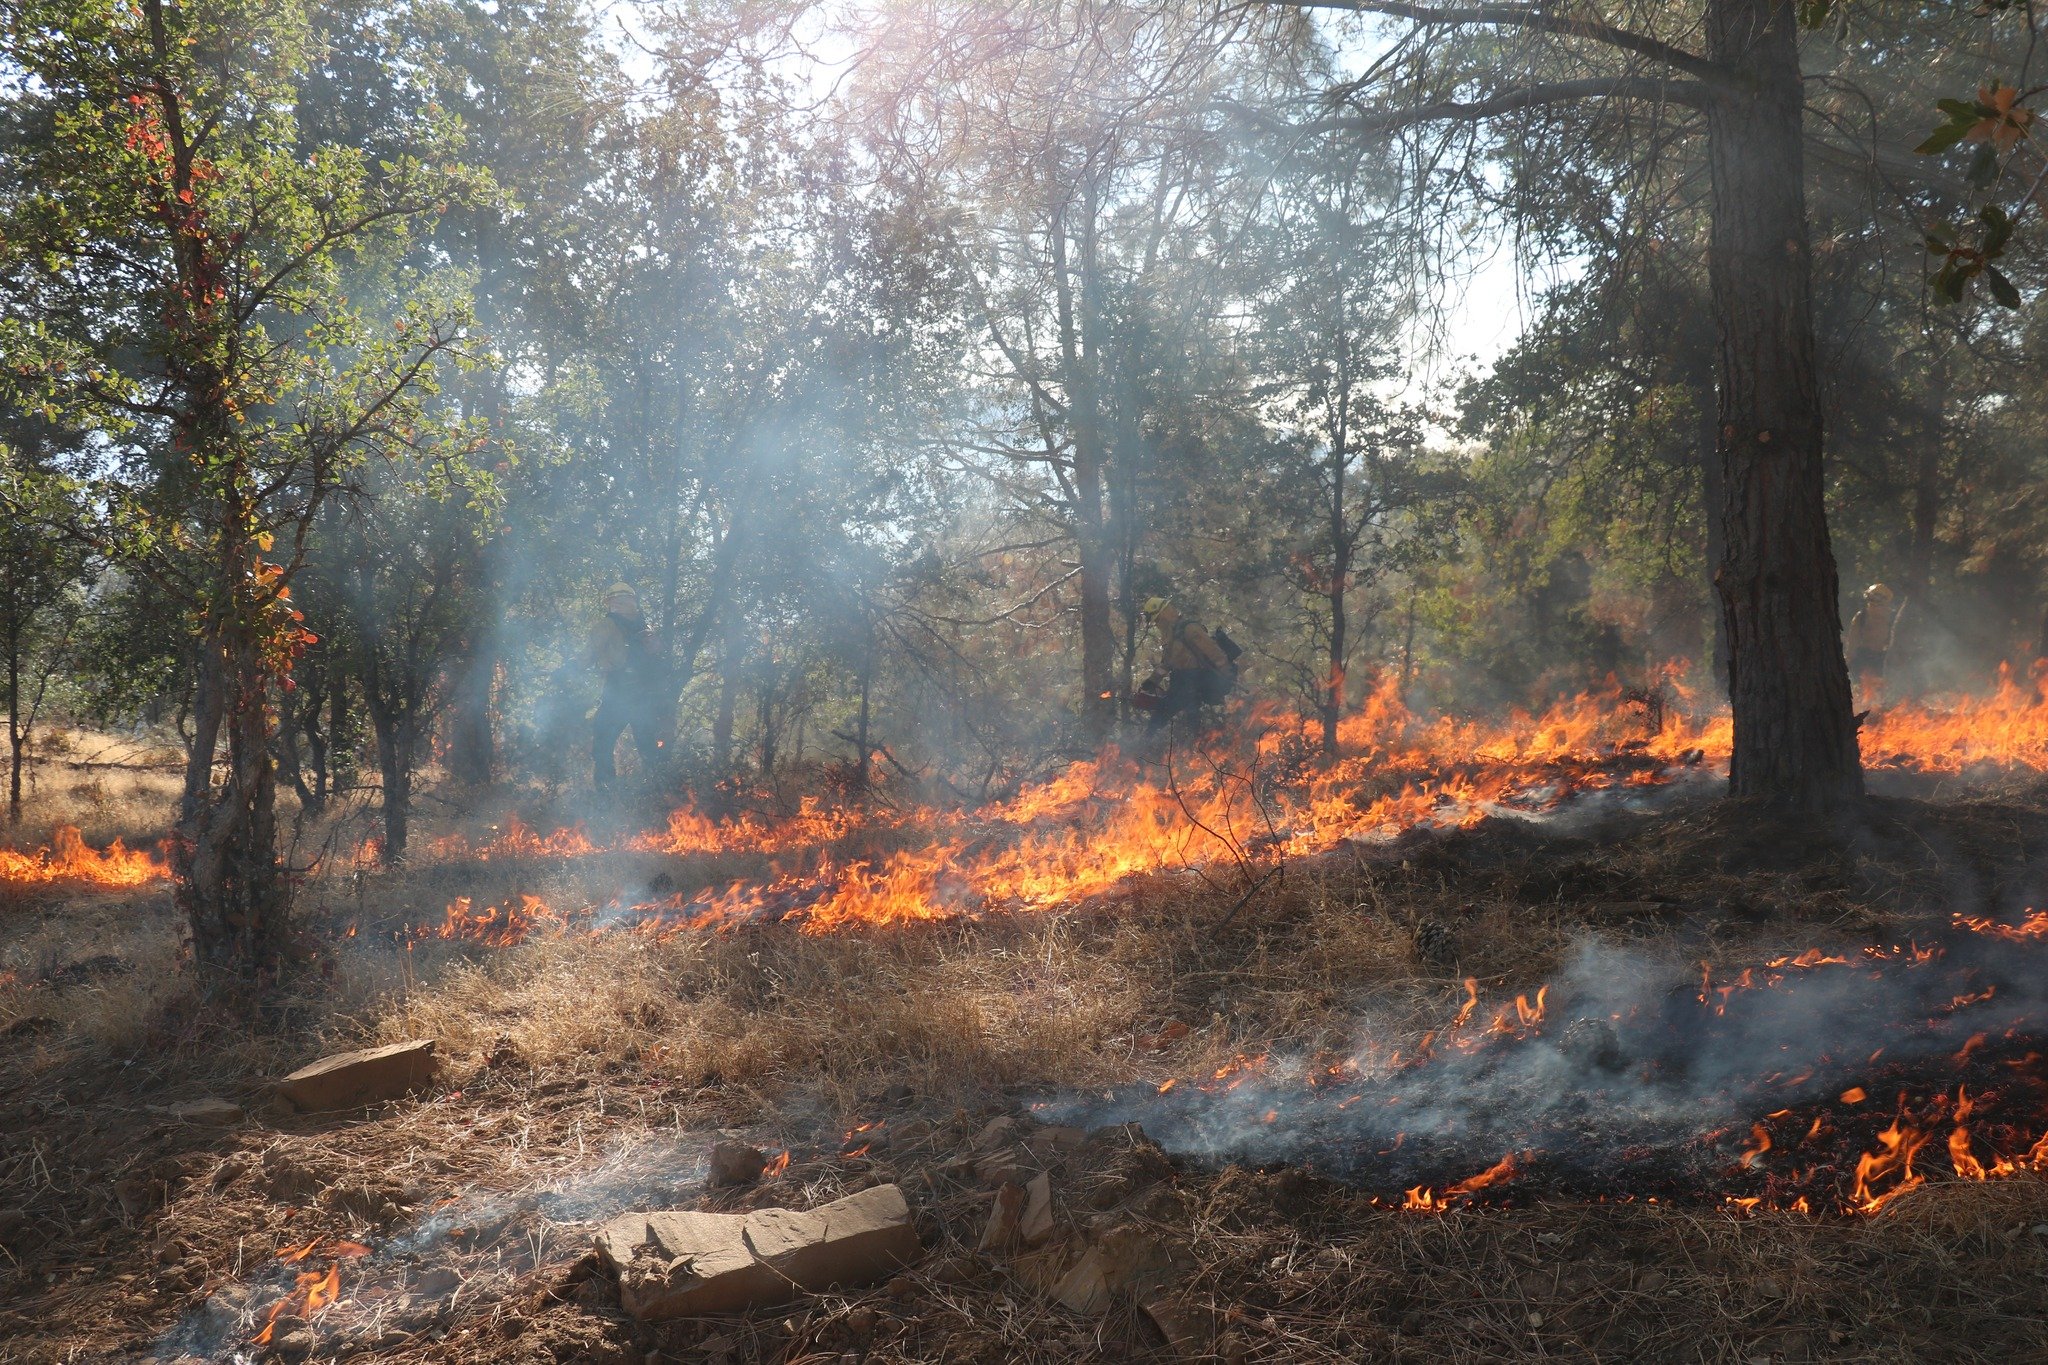 Controlled burns: A proactive approach to wildfire management. 🔥

CrewBoss PPE equips wildland firefighters with the protection they need to tackle these essential tasks safely.

#FightingFireWithFire
#GearYouCanTrust
#CrewBossPPE